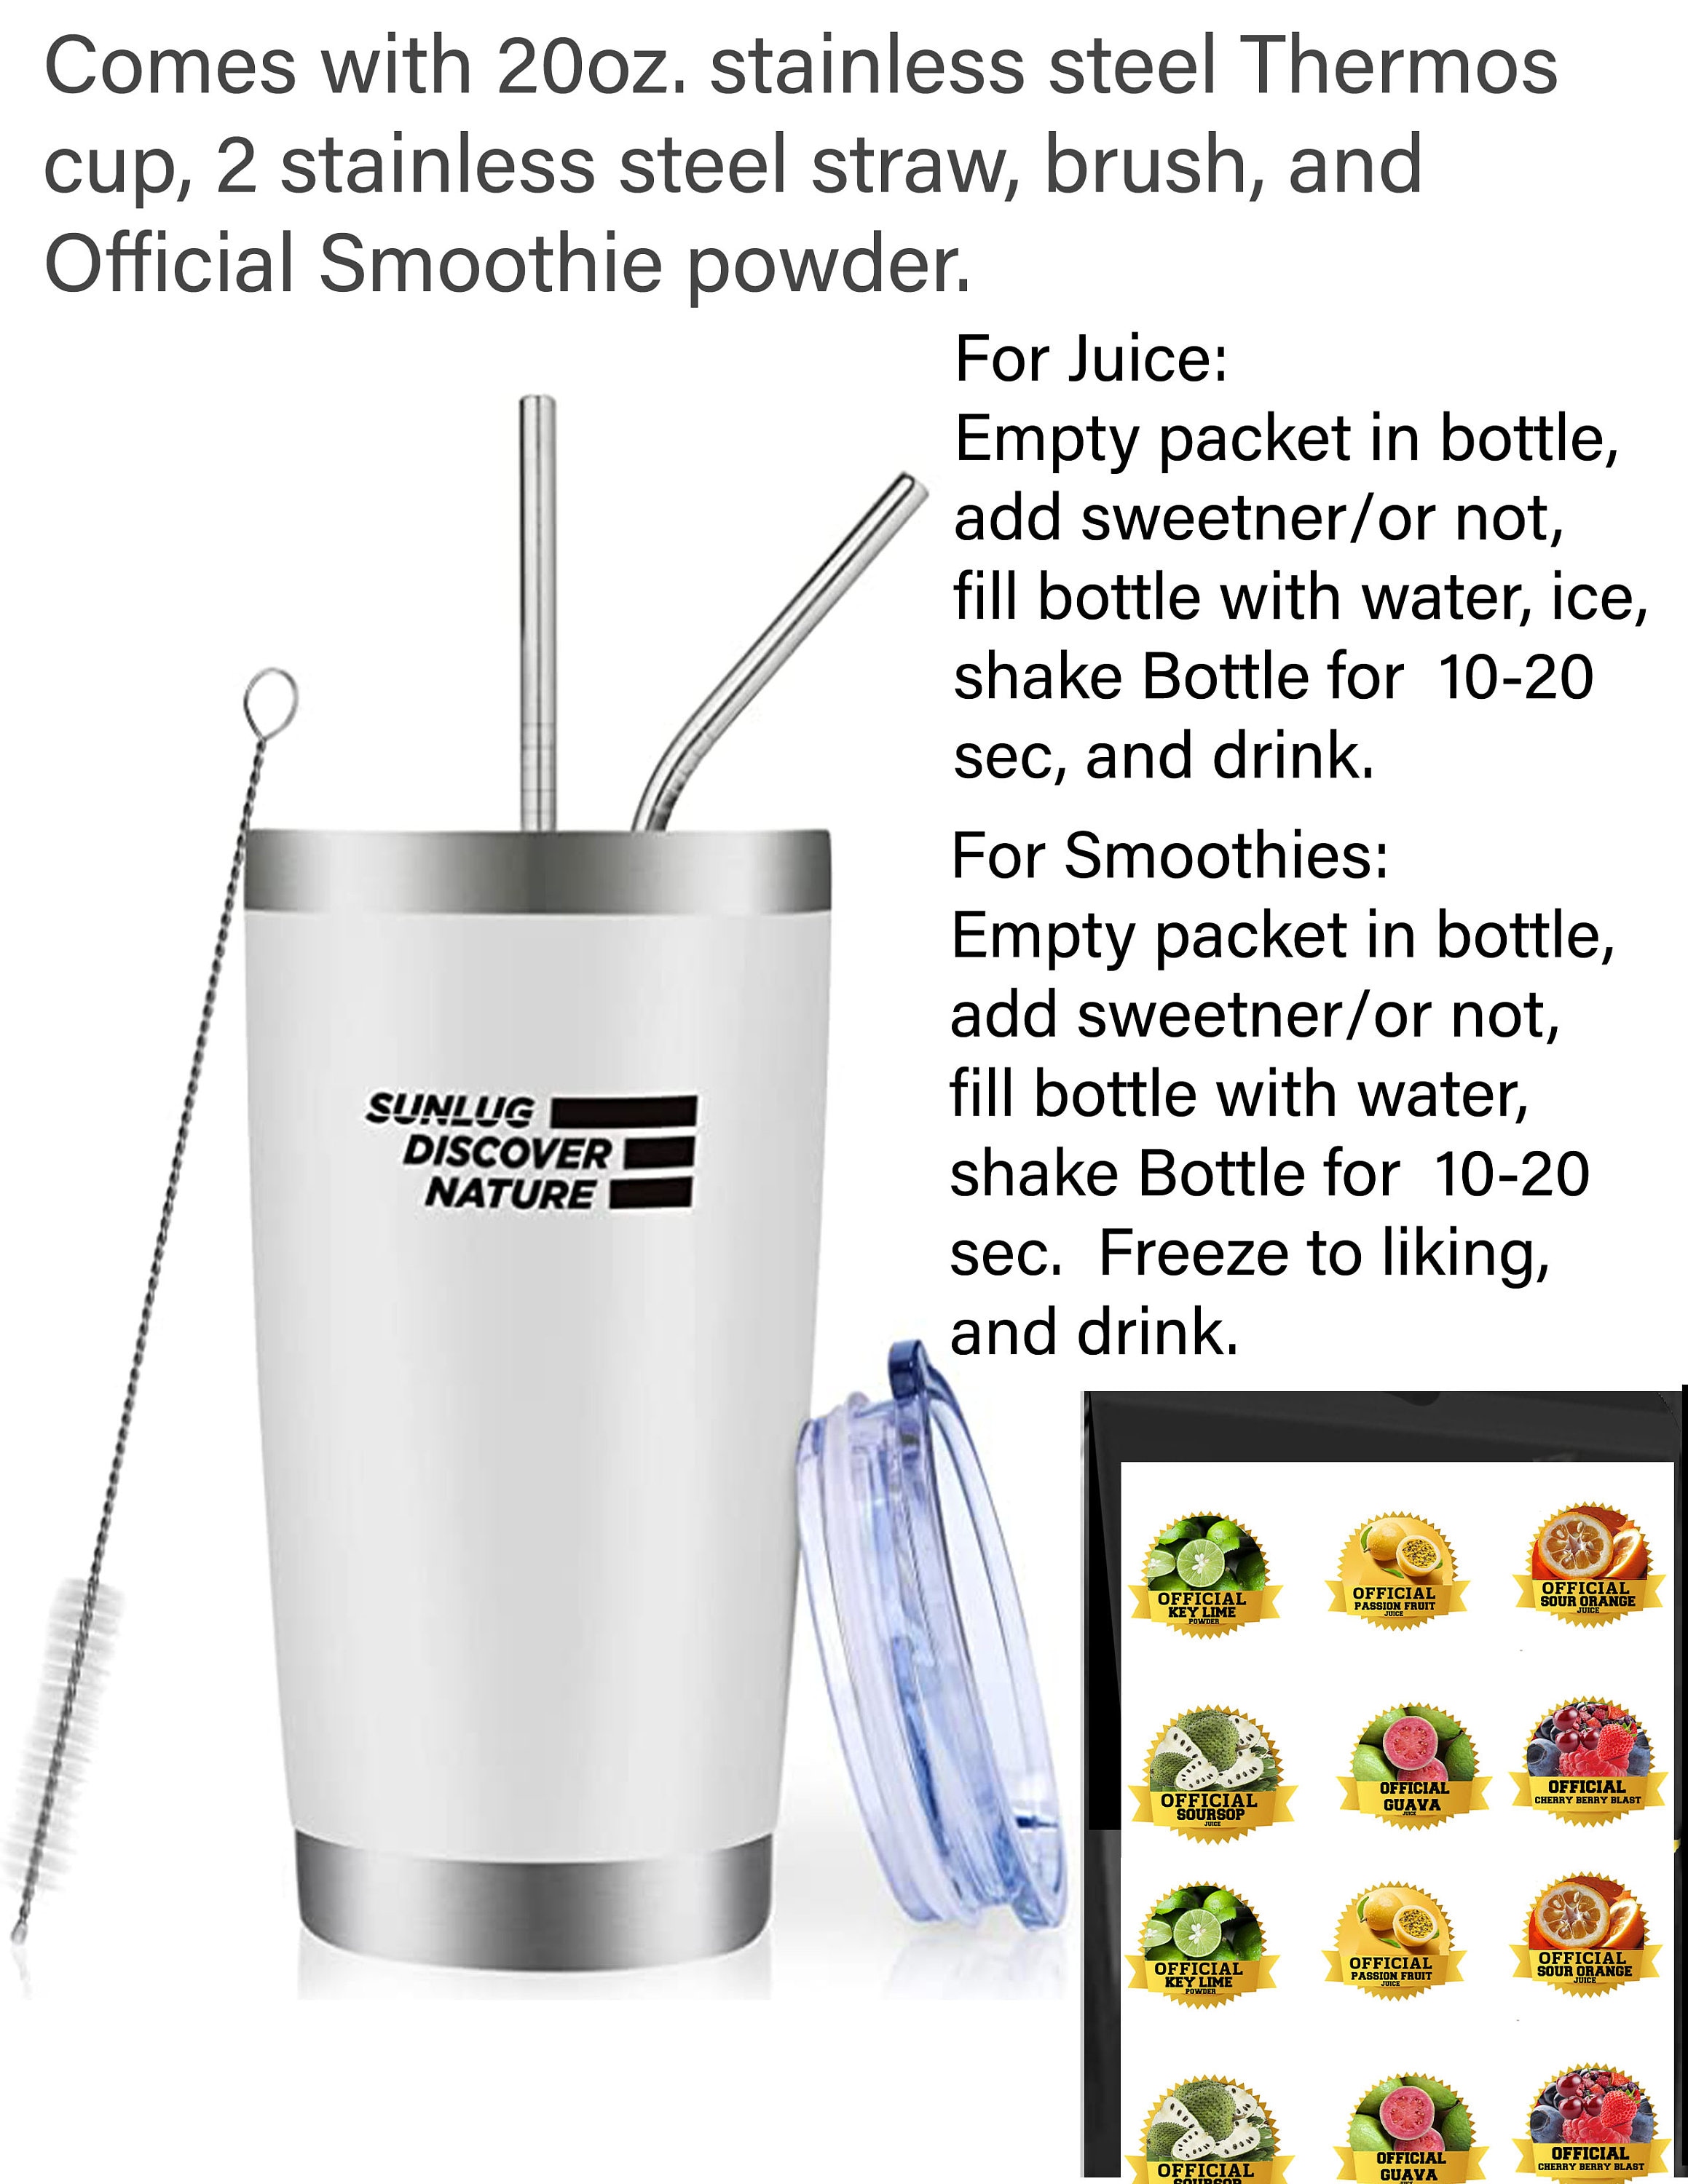 Smoothie Cup Kit includes OFFICIAL SMOOTHIE Powder, Cup, and Straw 